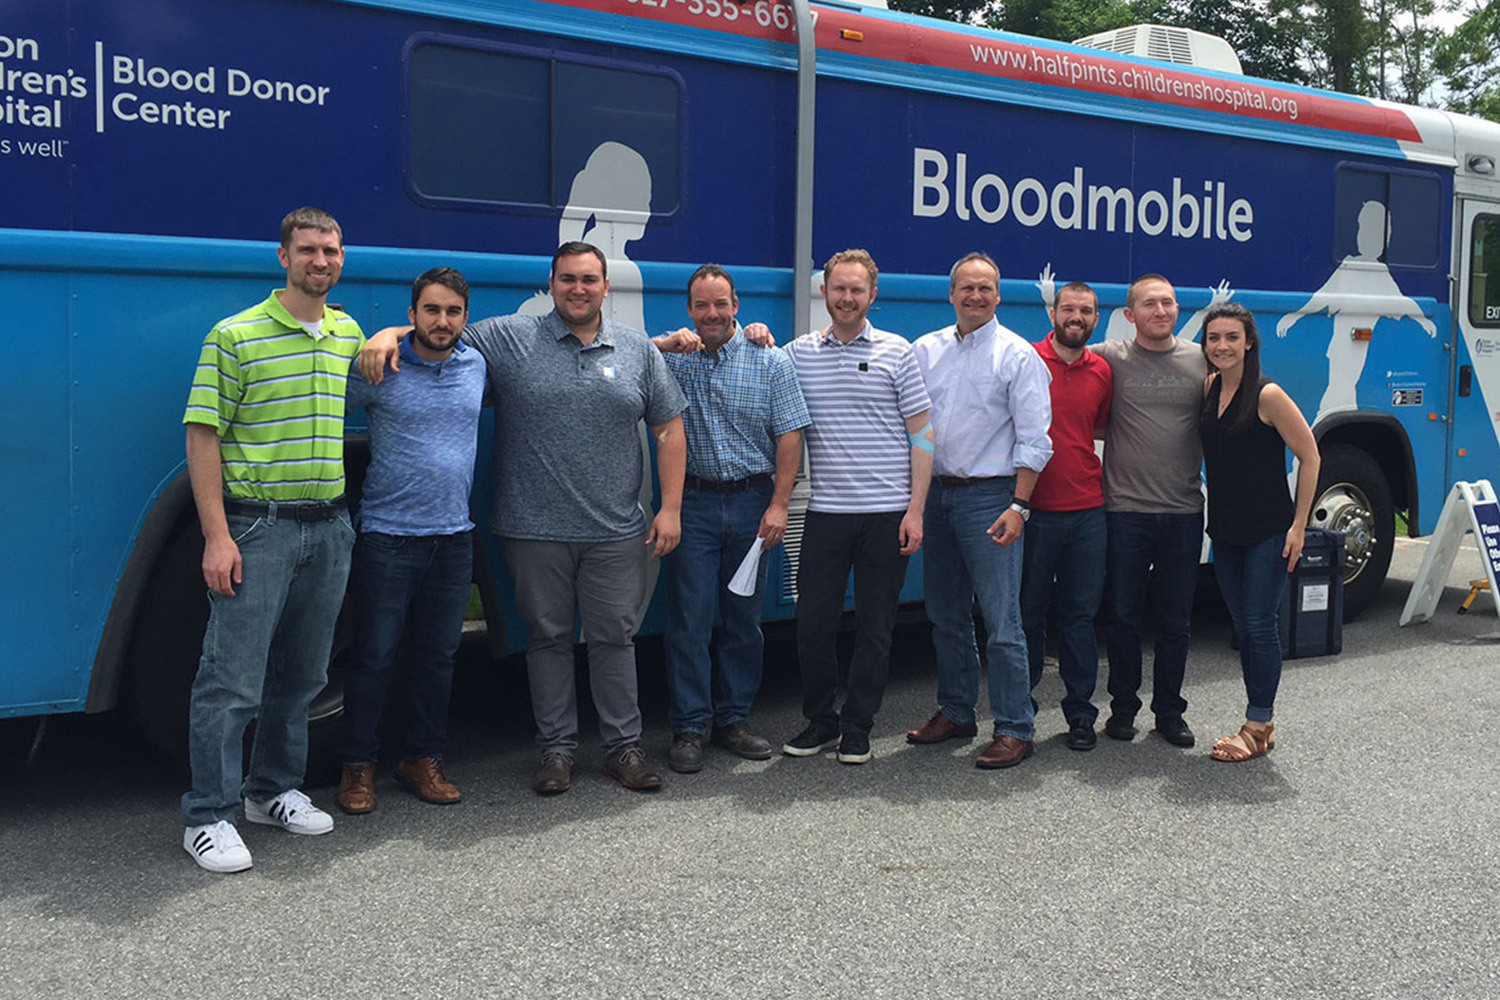 Staff stand in front of Boston Children's Hospital's bloodmobile after donating